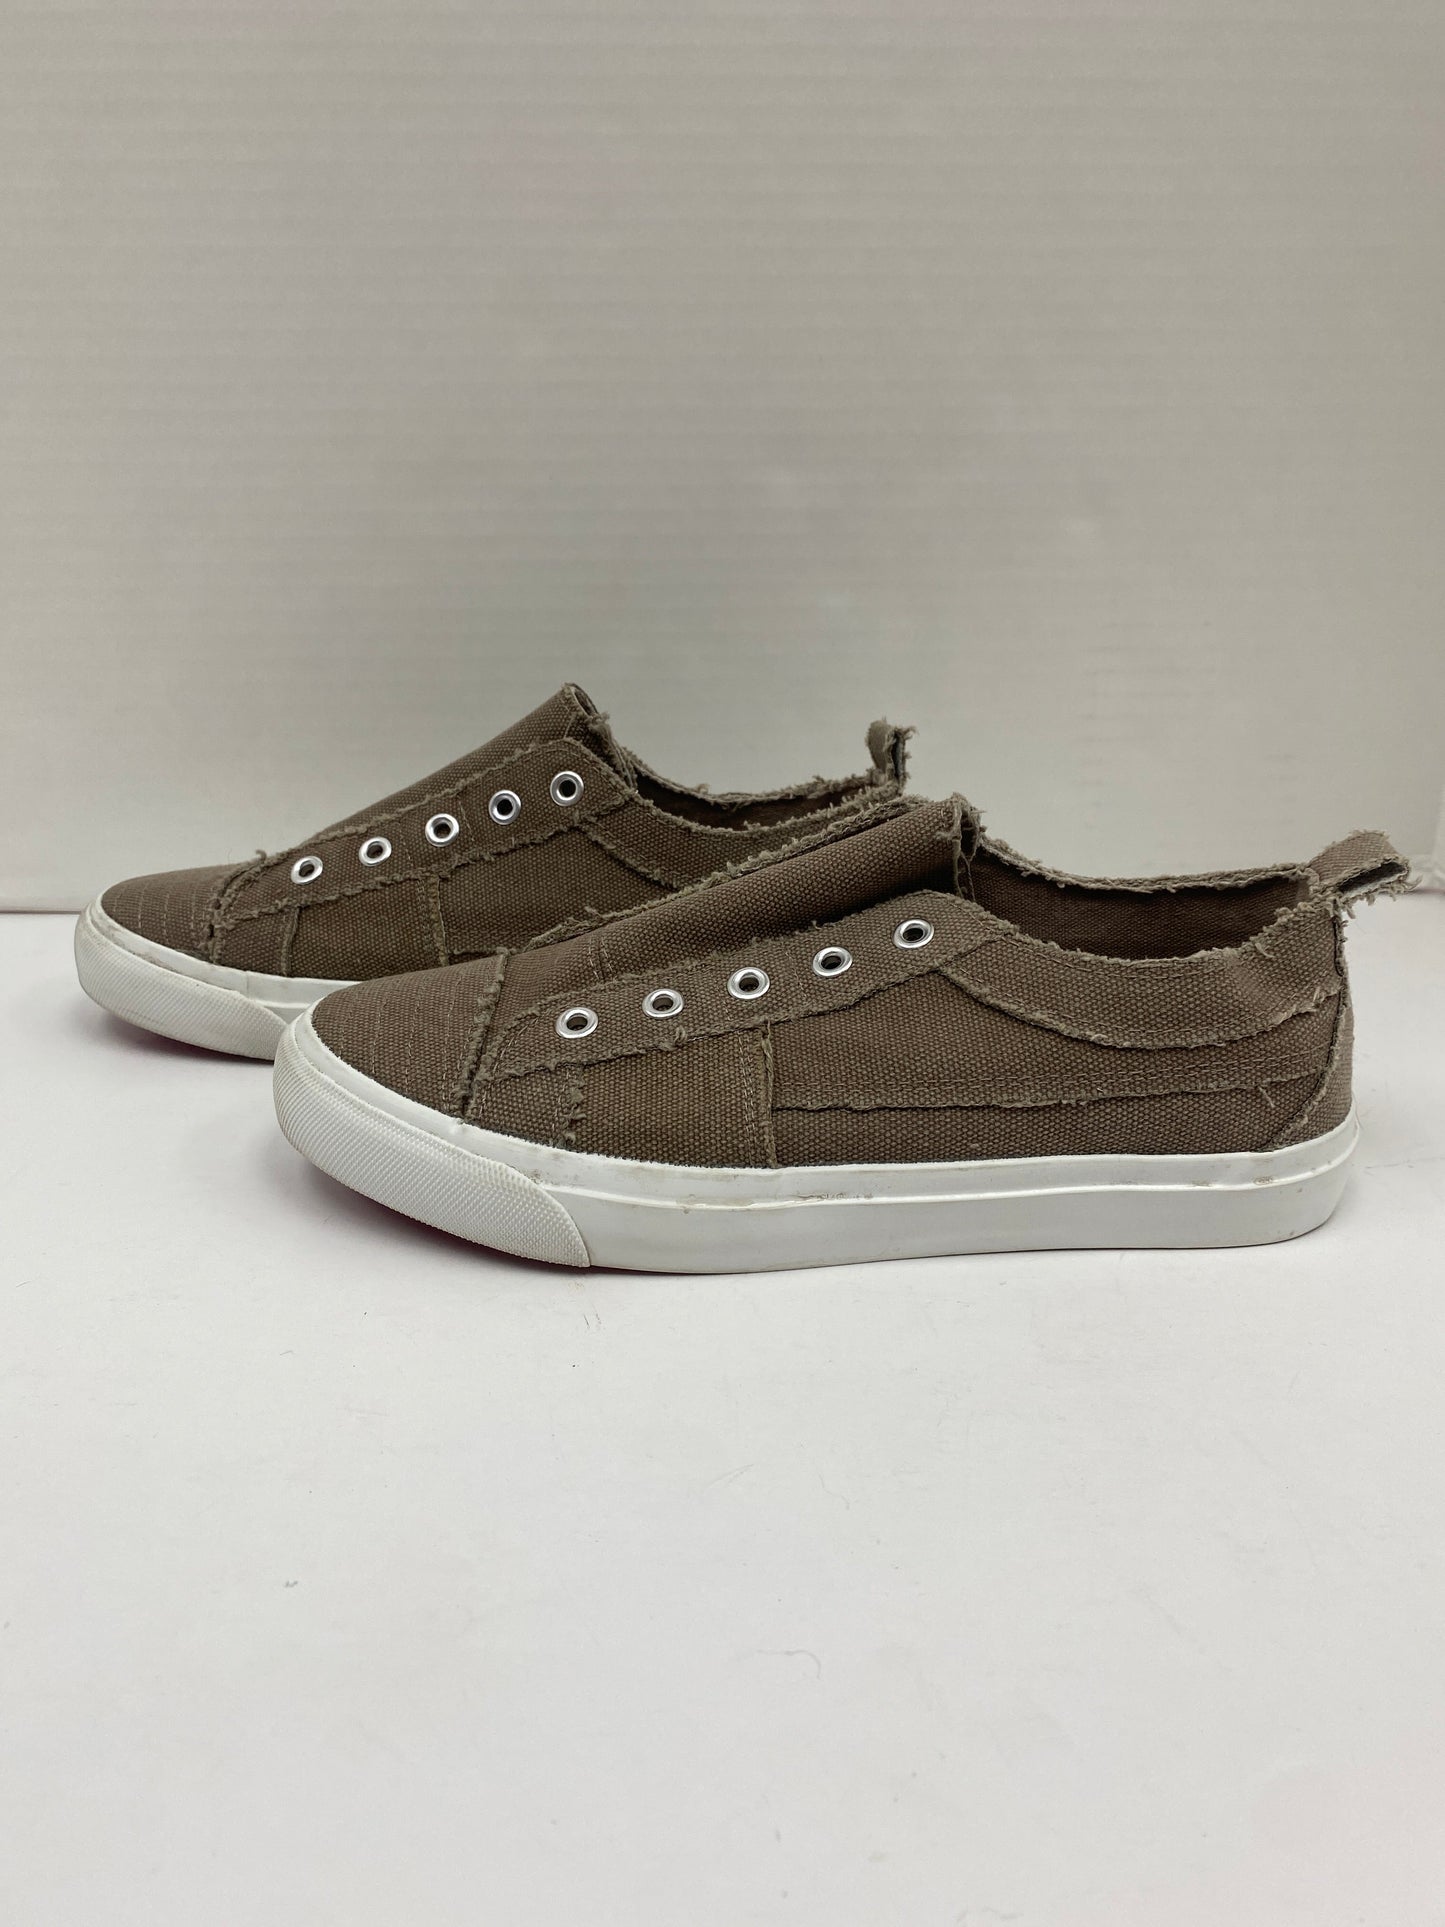 Taupe Shoes Sneakers Corkys, Size 7